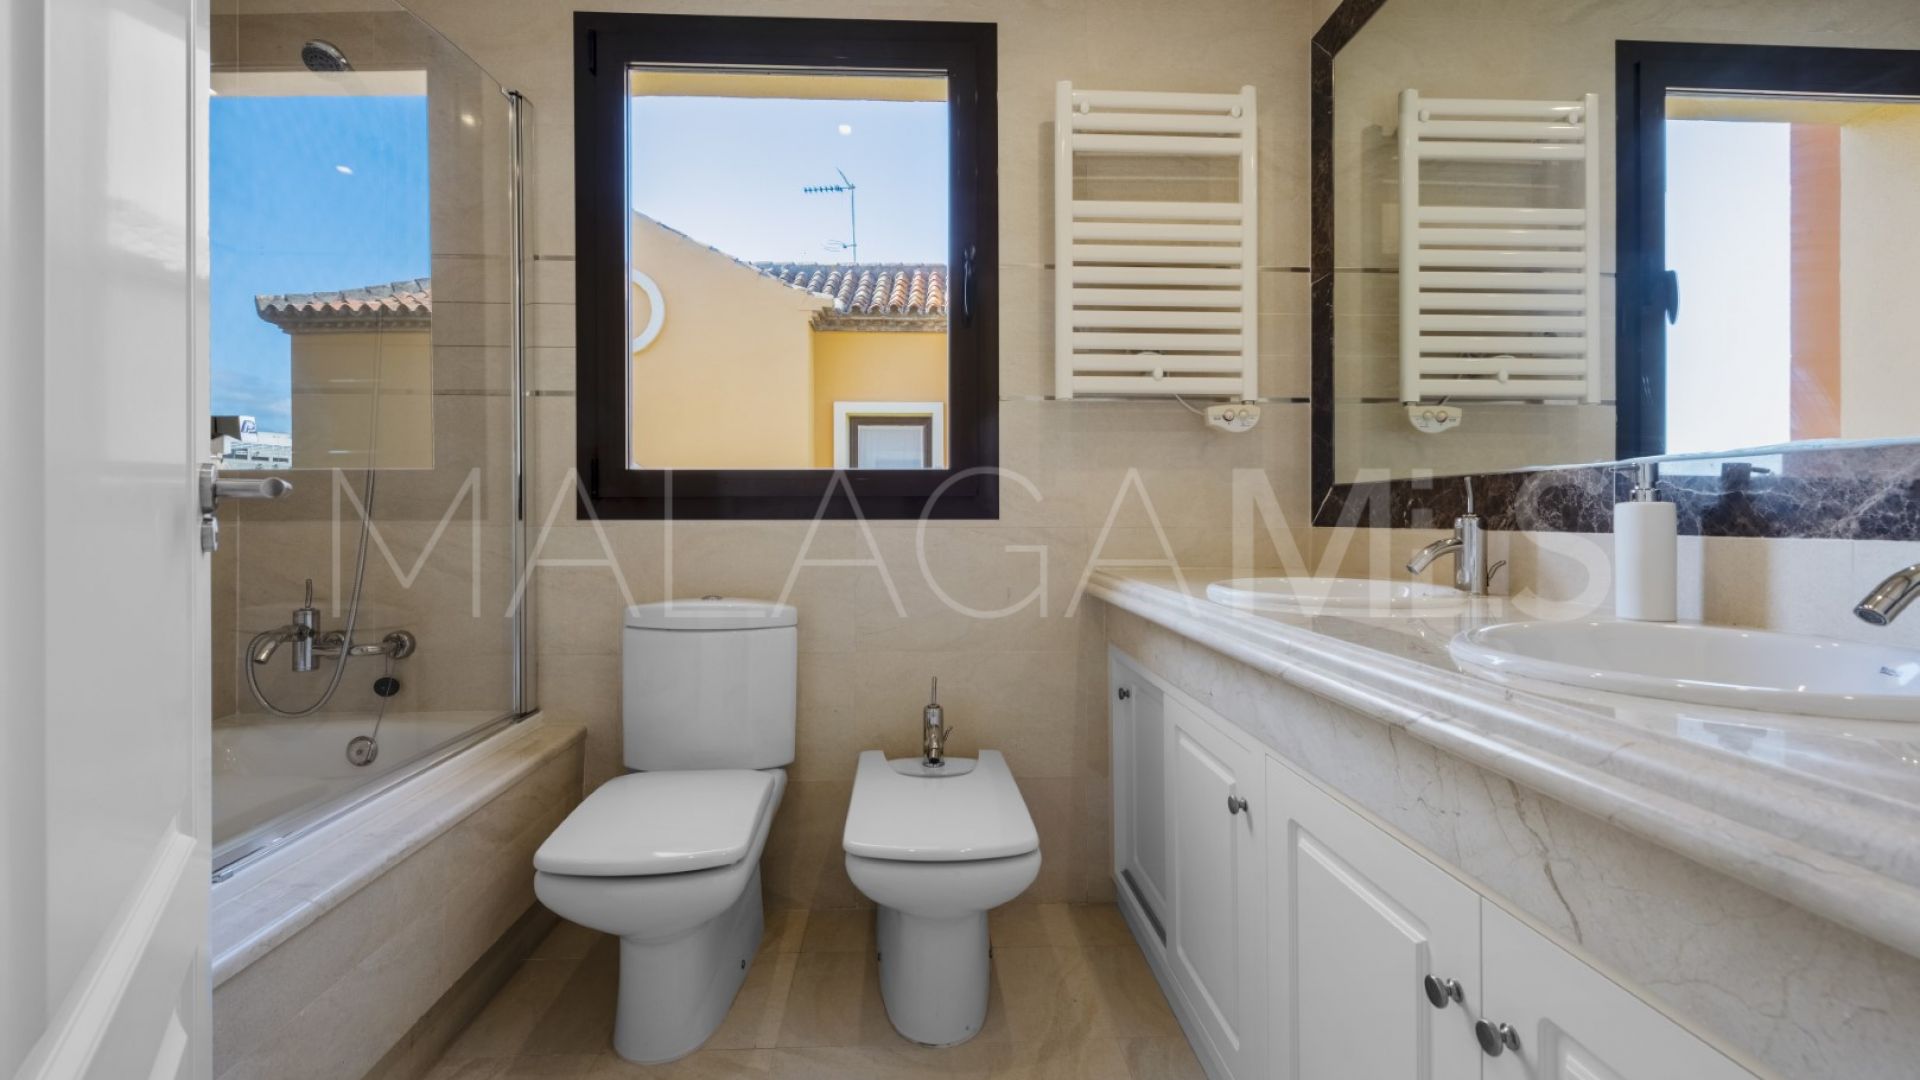 Villa with 4 bedrooms for sale in Valle Romano